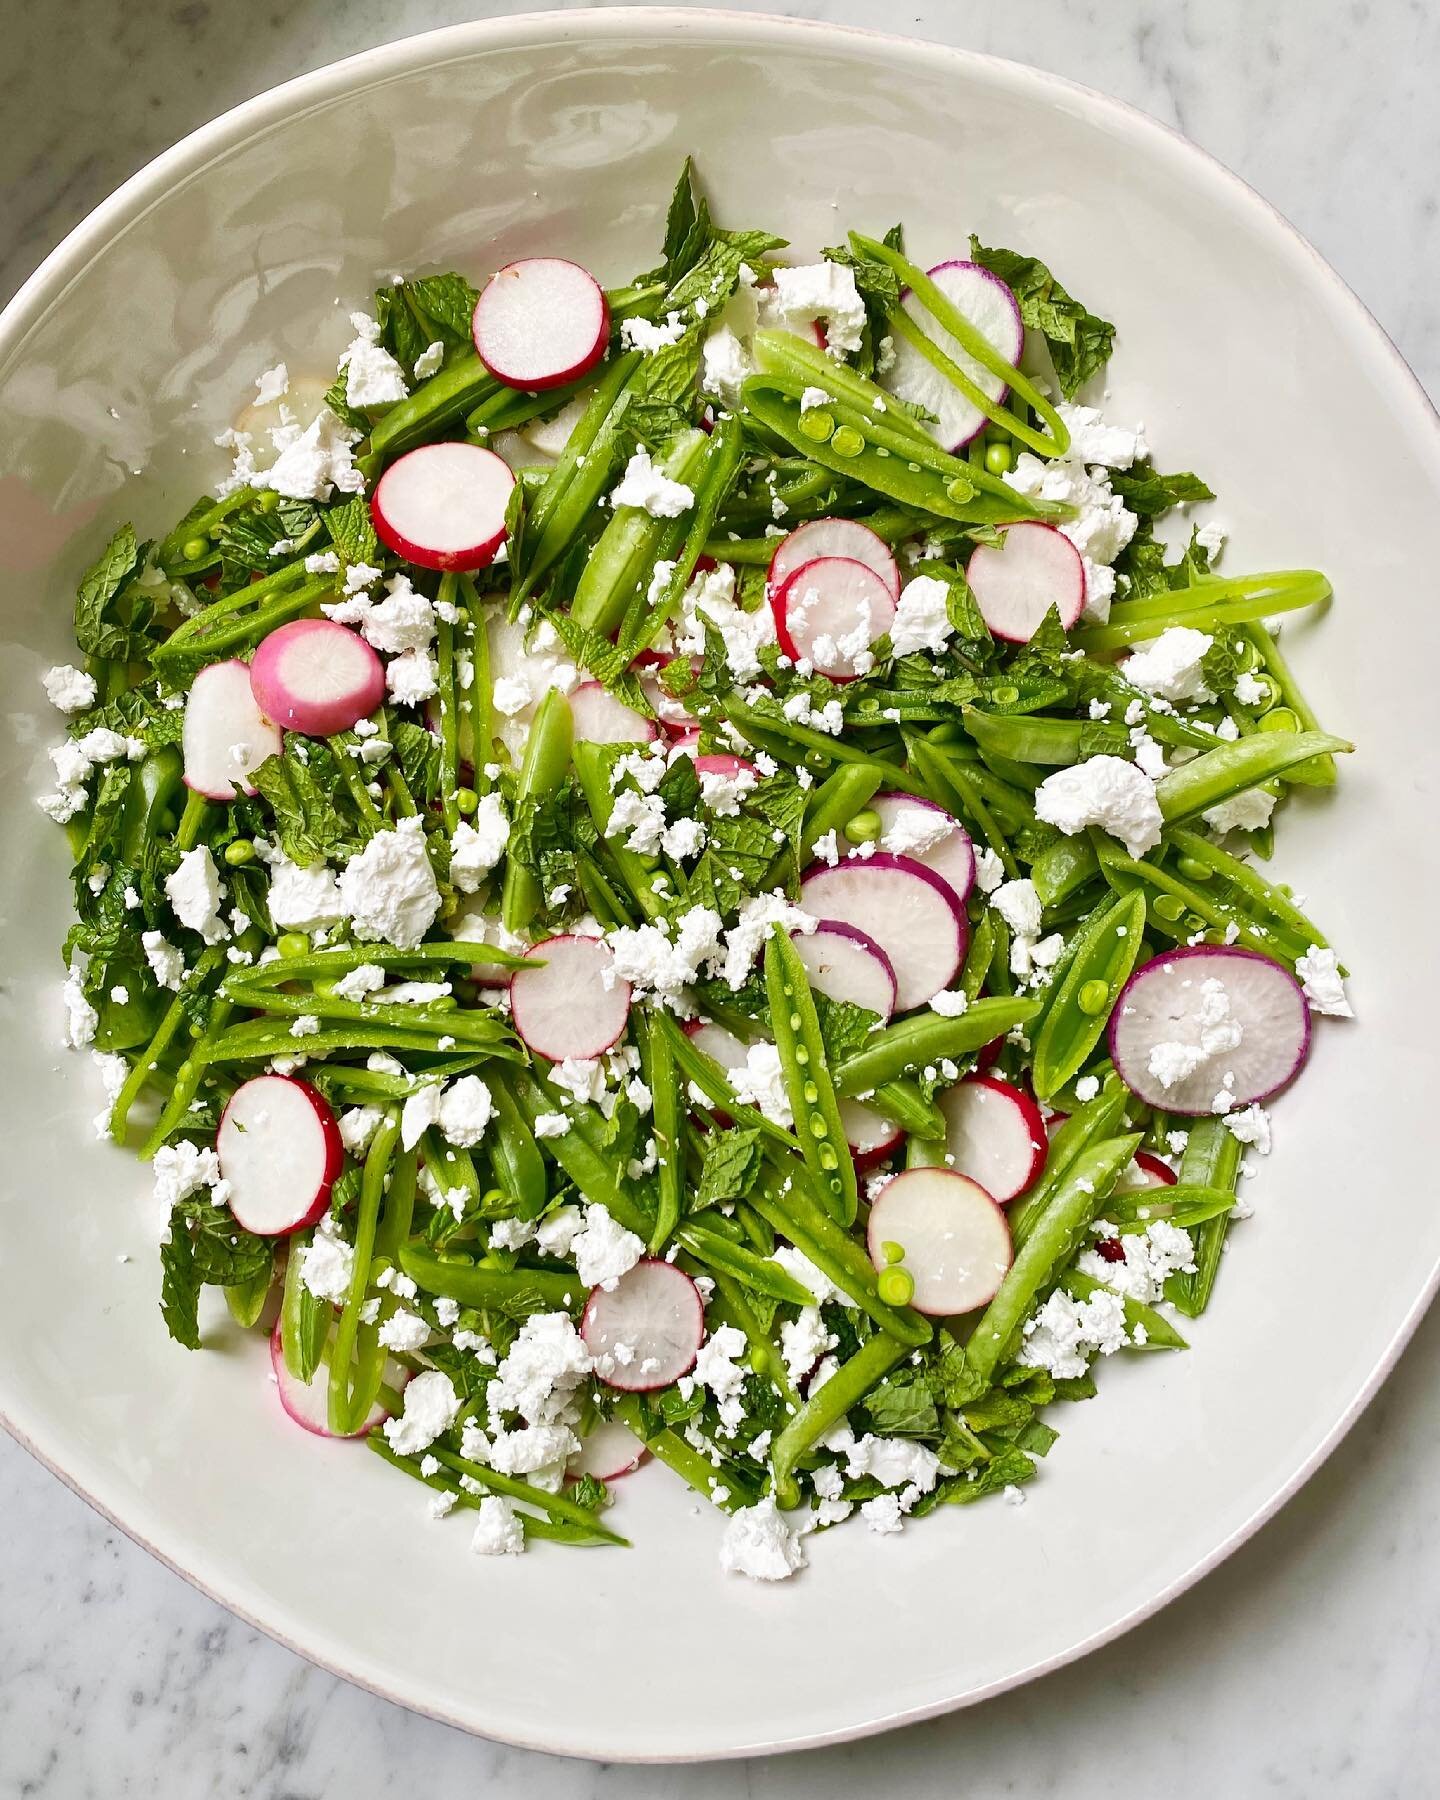 When you think salad do you automatically think leafy greens? Change things up by using your fave fresh veggies plus feta for a flavor and protein boost. 
#springsalad #radishes #snappeas #bulgarianfeta #fresh #eatmoreplants #goodfoodrx